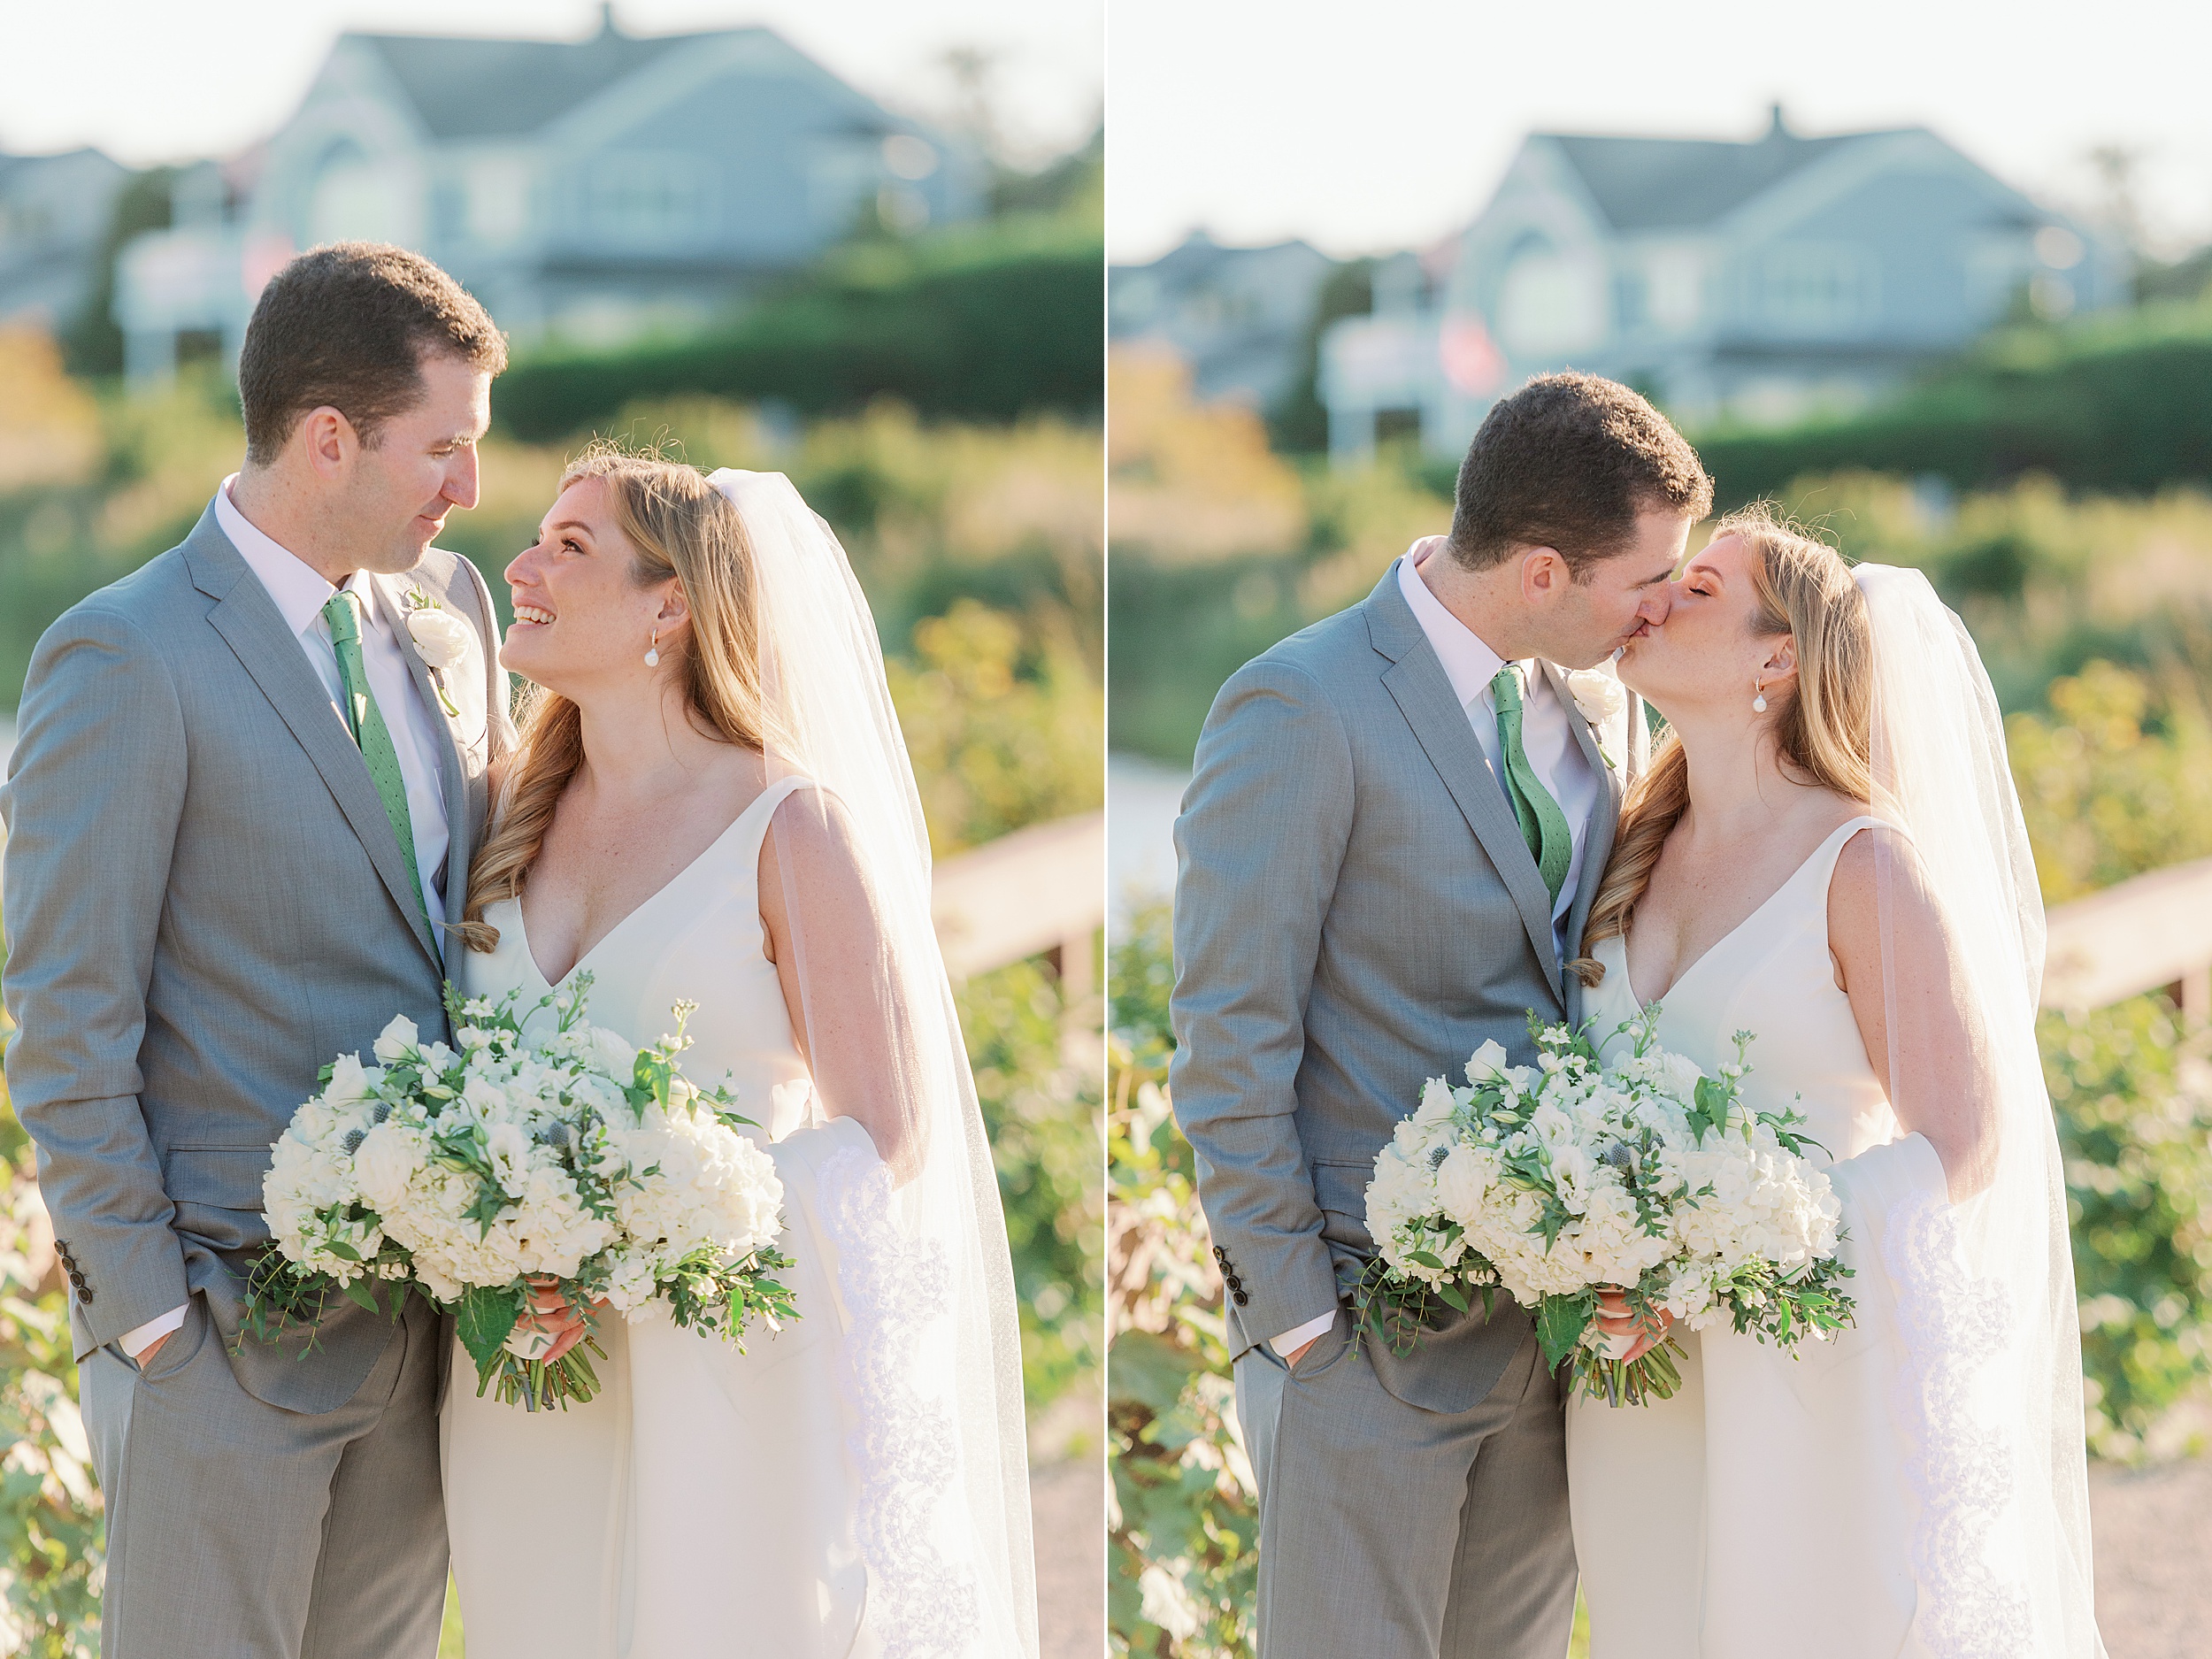 sunset couples portraits of bride and groom at Weekapaug Inn Wedding in Westerly RI